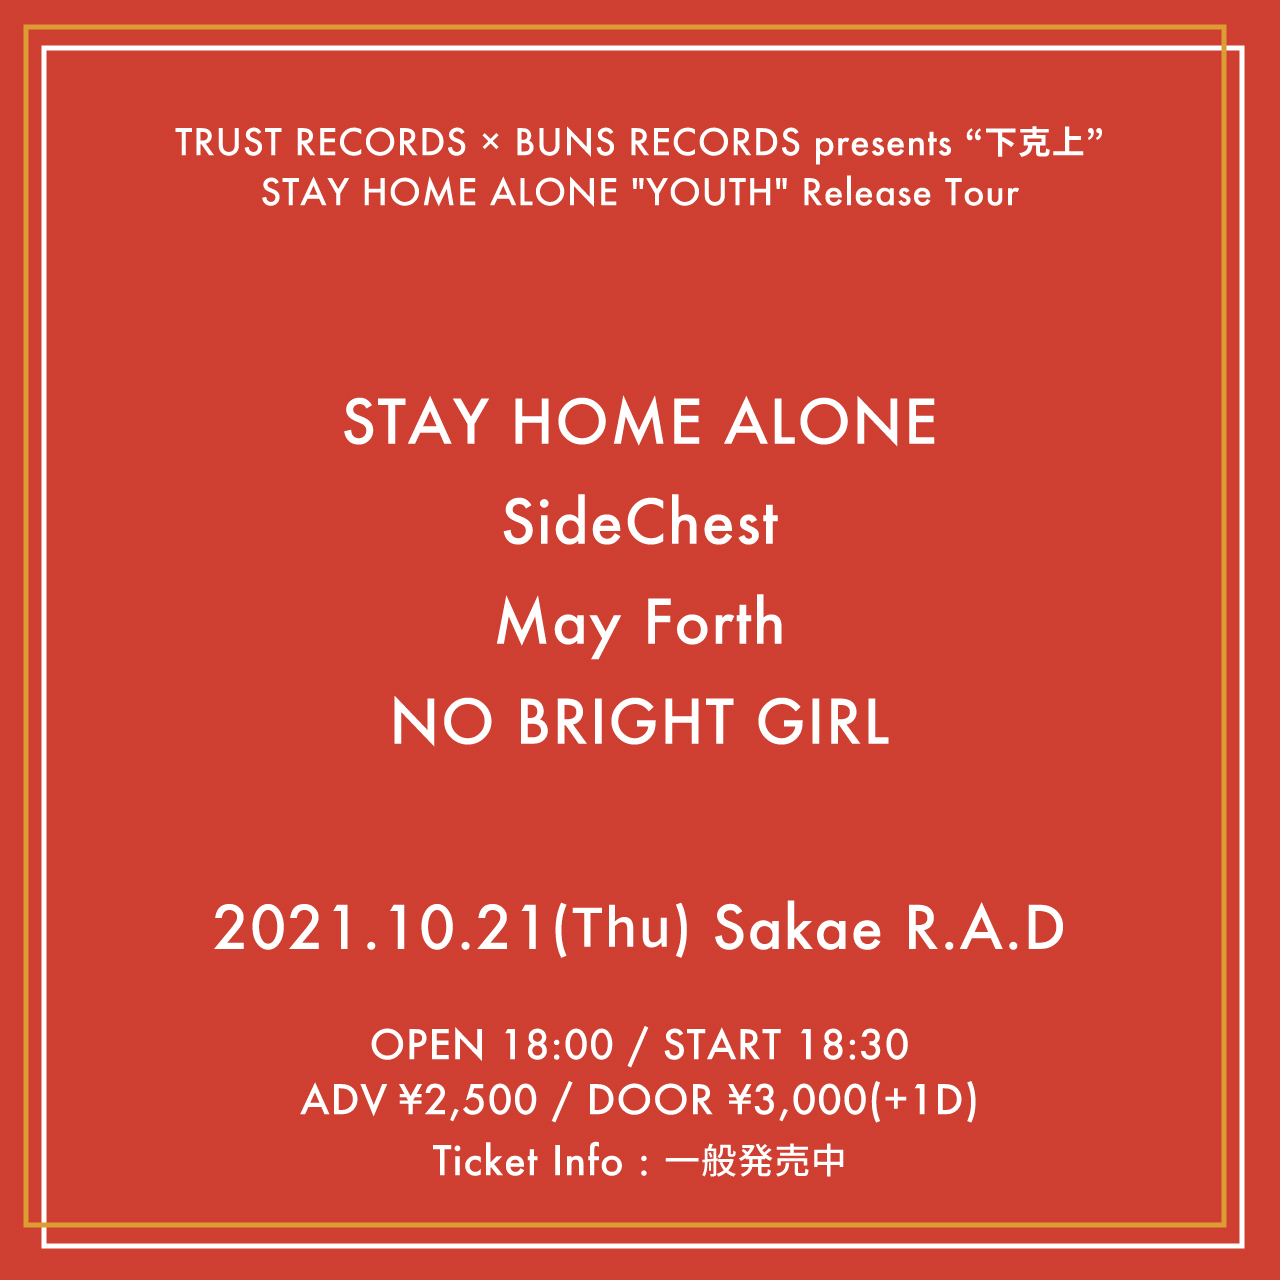 TRUST RECORDS × BUNS RECORDS presents "下克上" STAY HOME ALONE "YOUTH" Release Tour